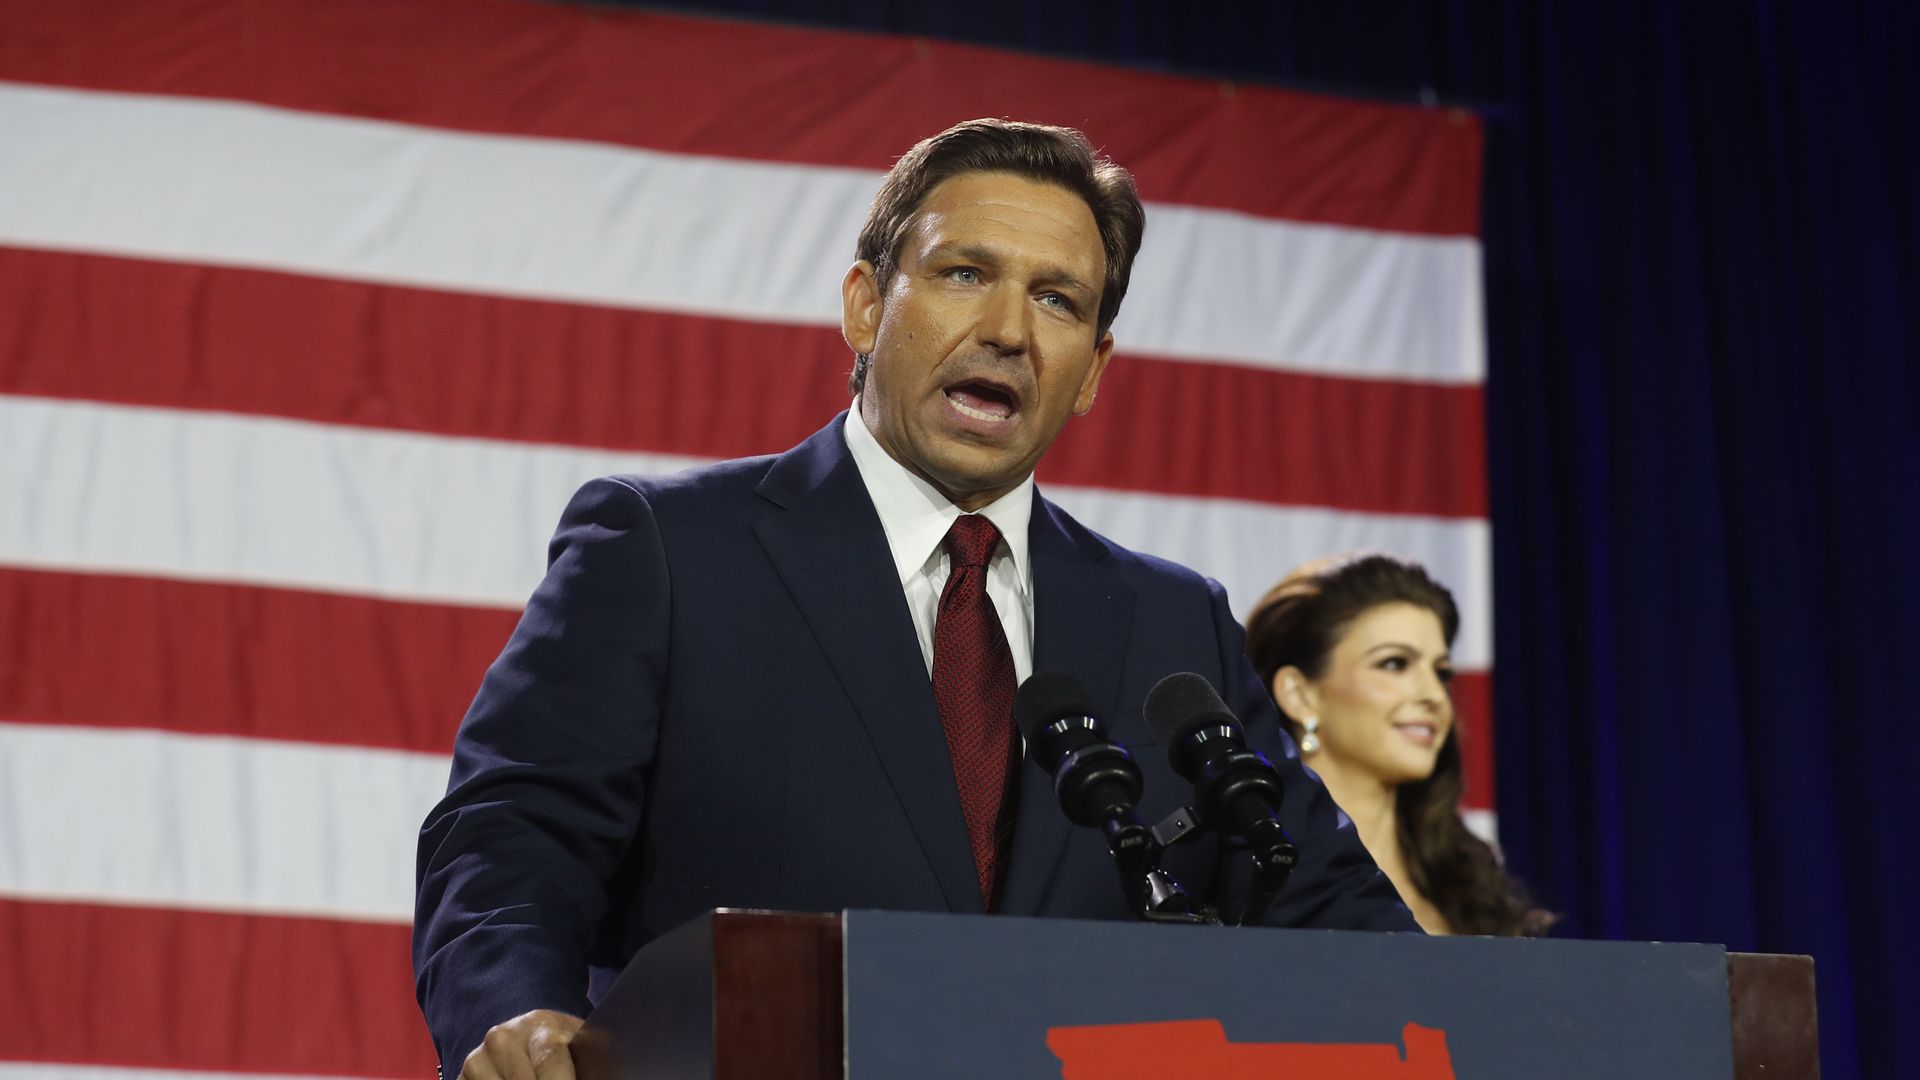 Florida Gov. Ron DeSantis gives a victory speech after the midterms.